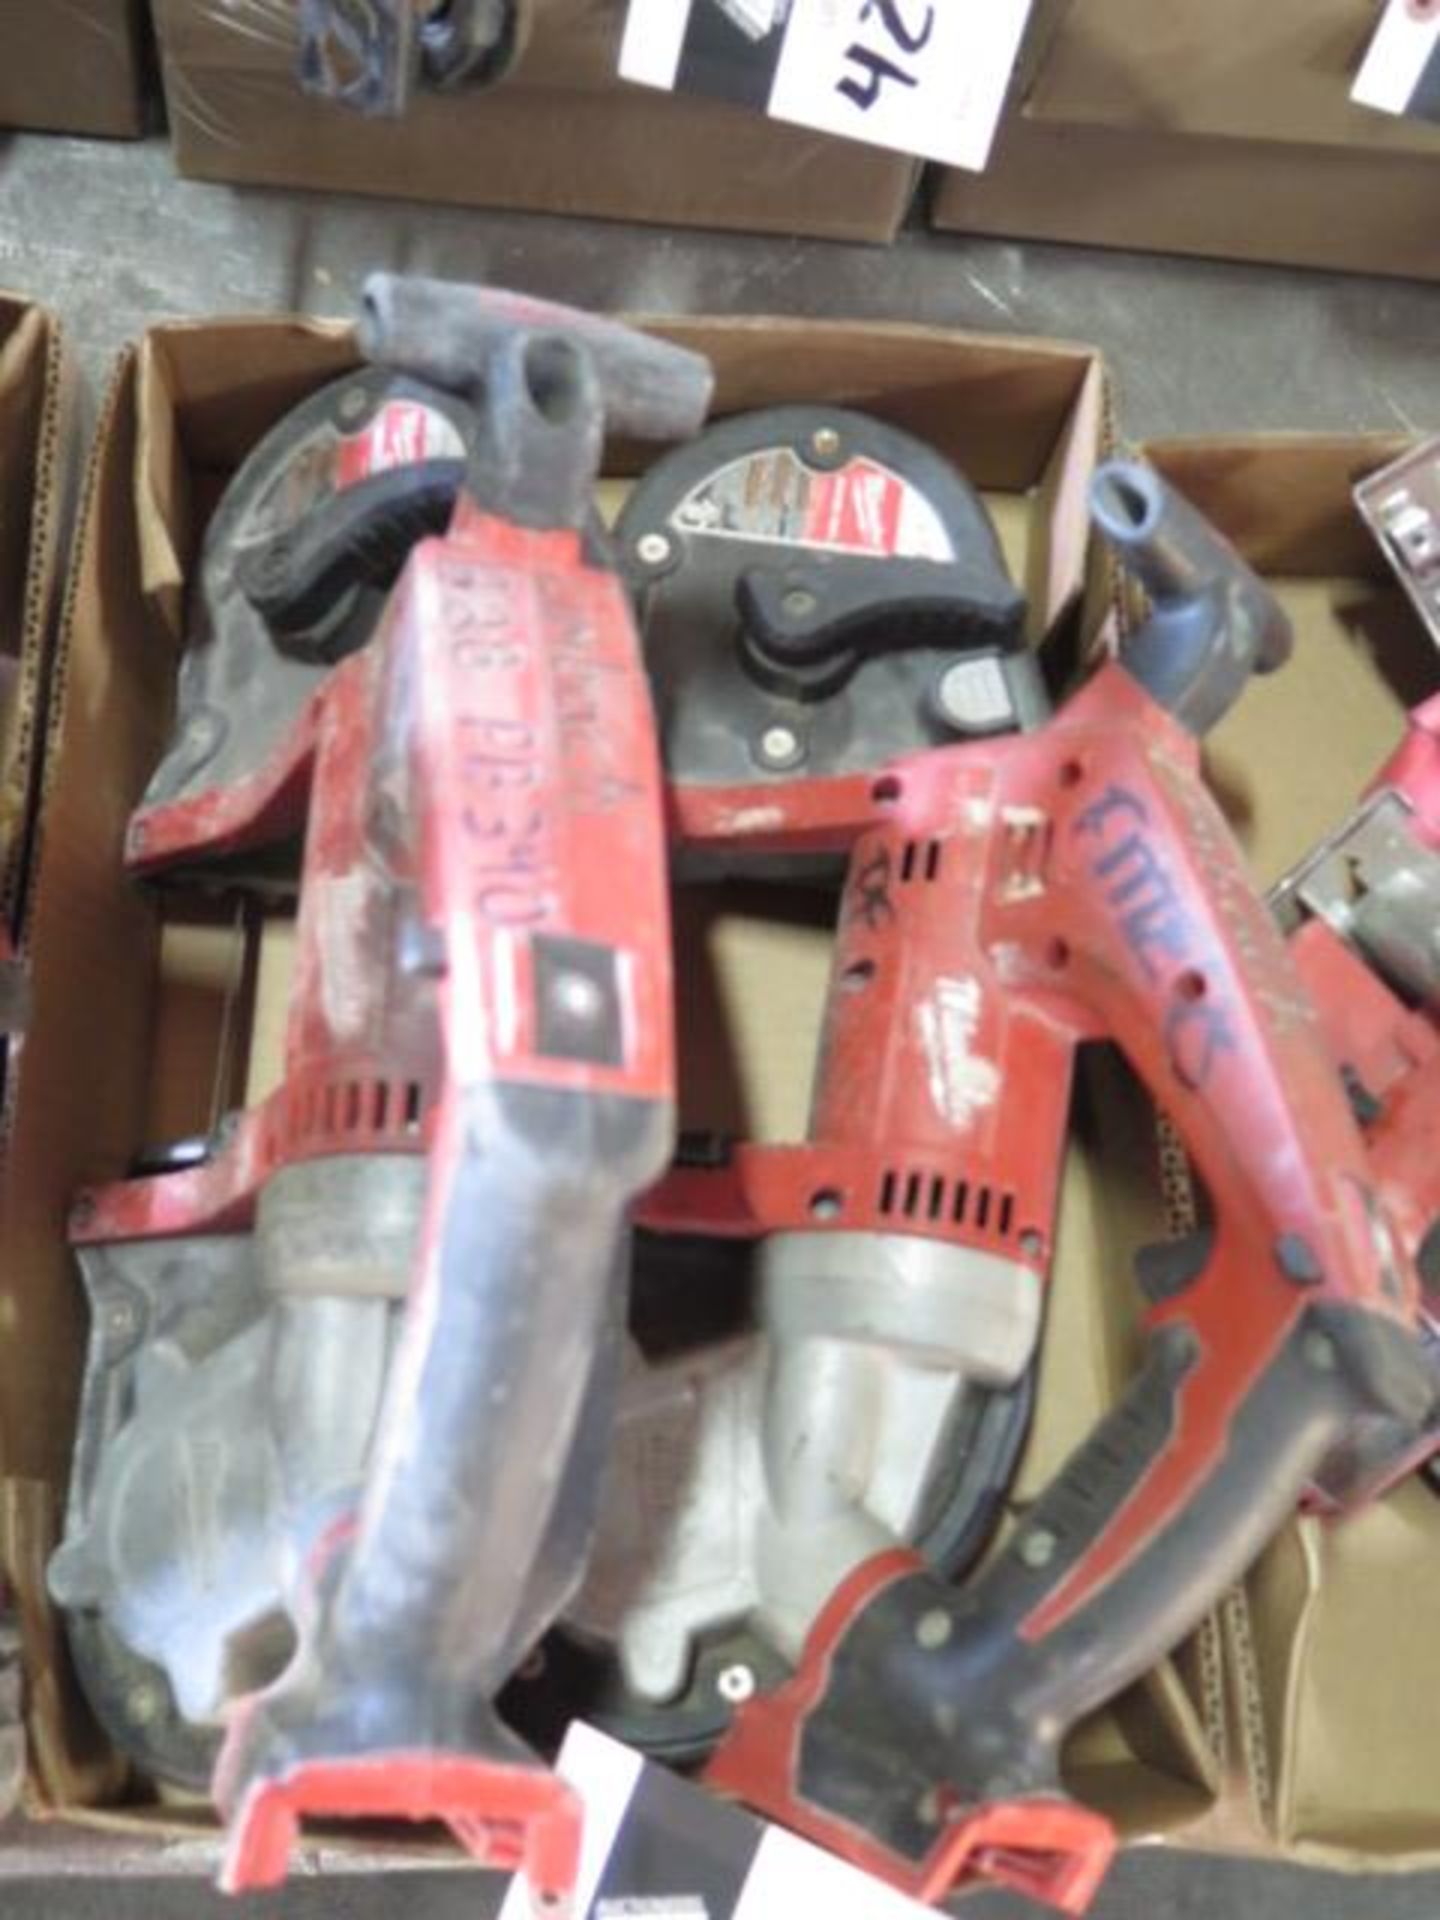 Milwaukee 18V Portable Band Saws (2) w/ Batteries and Chargers (SOLD AS-IS - NO WARRANTY) - Image 2 of 6